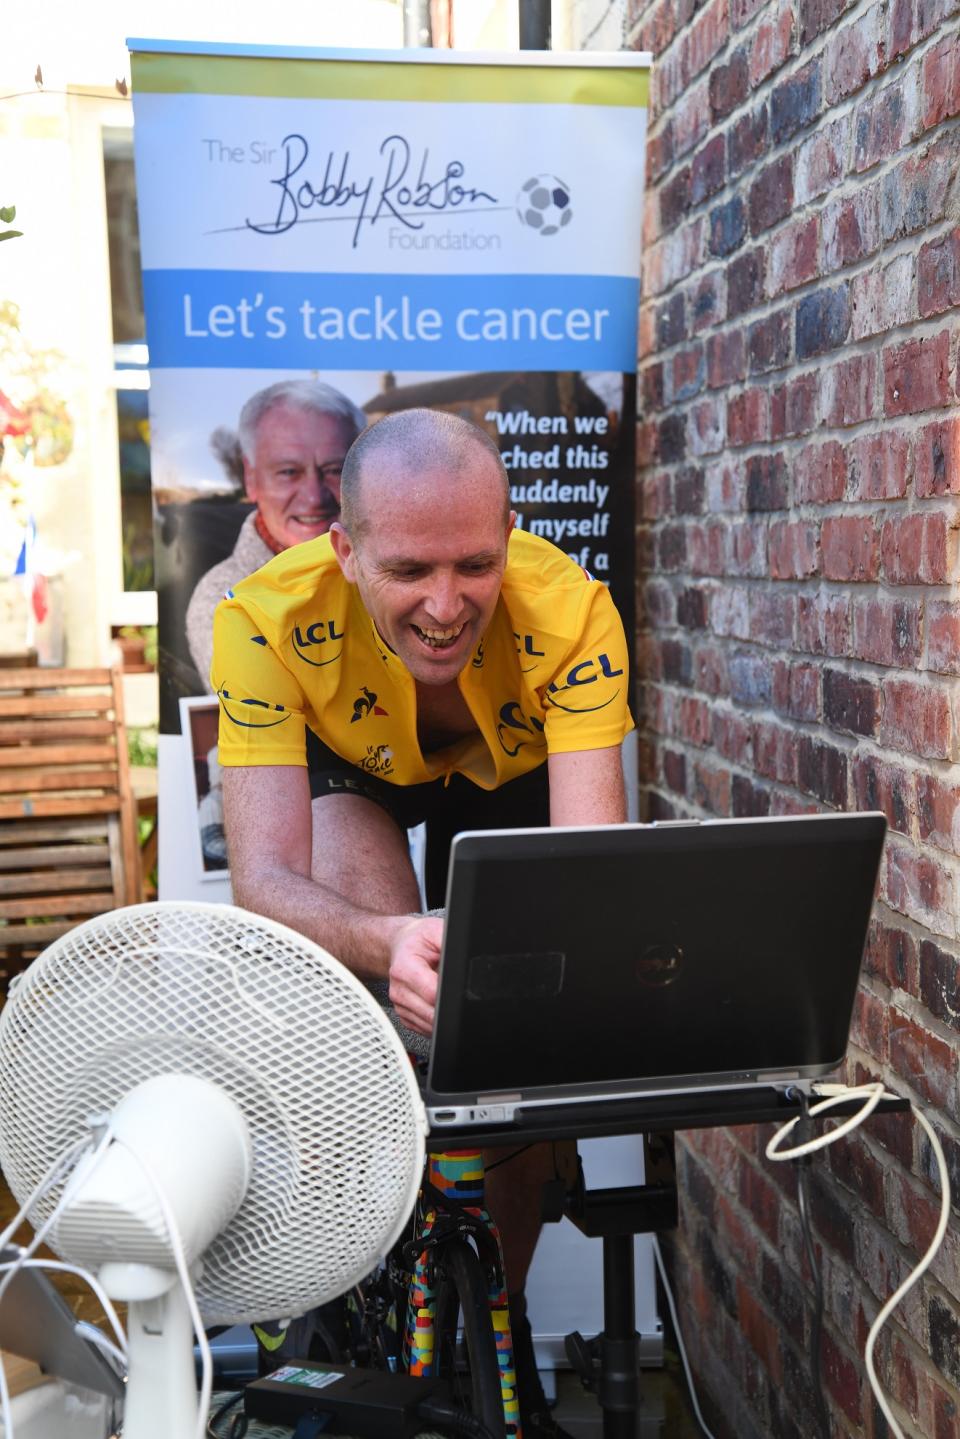 Mr Farquharson has been riding around 30 miles each day (Sir Bobby Robson Foundation/PA)